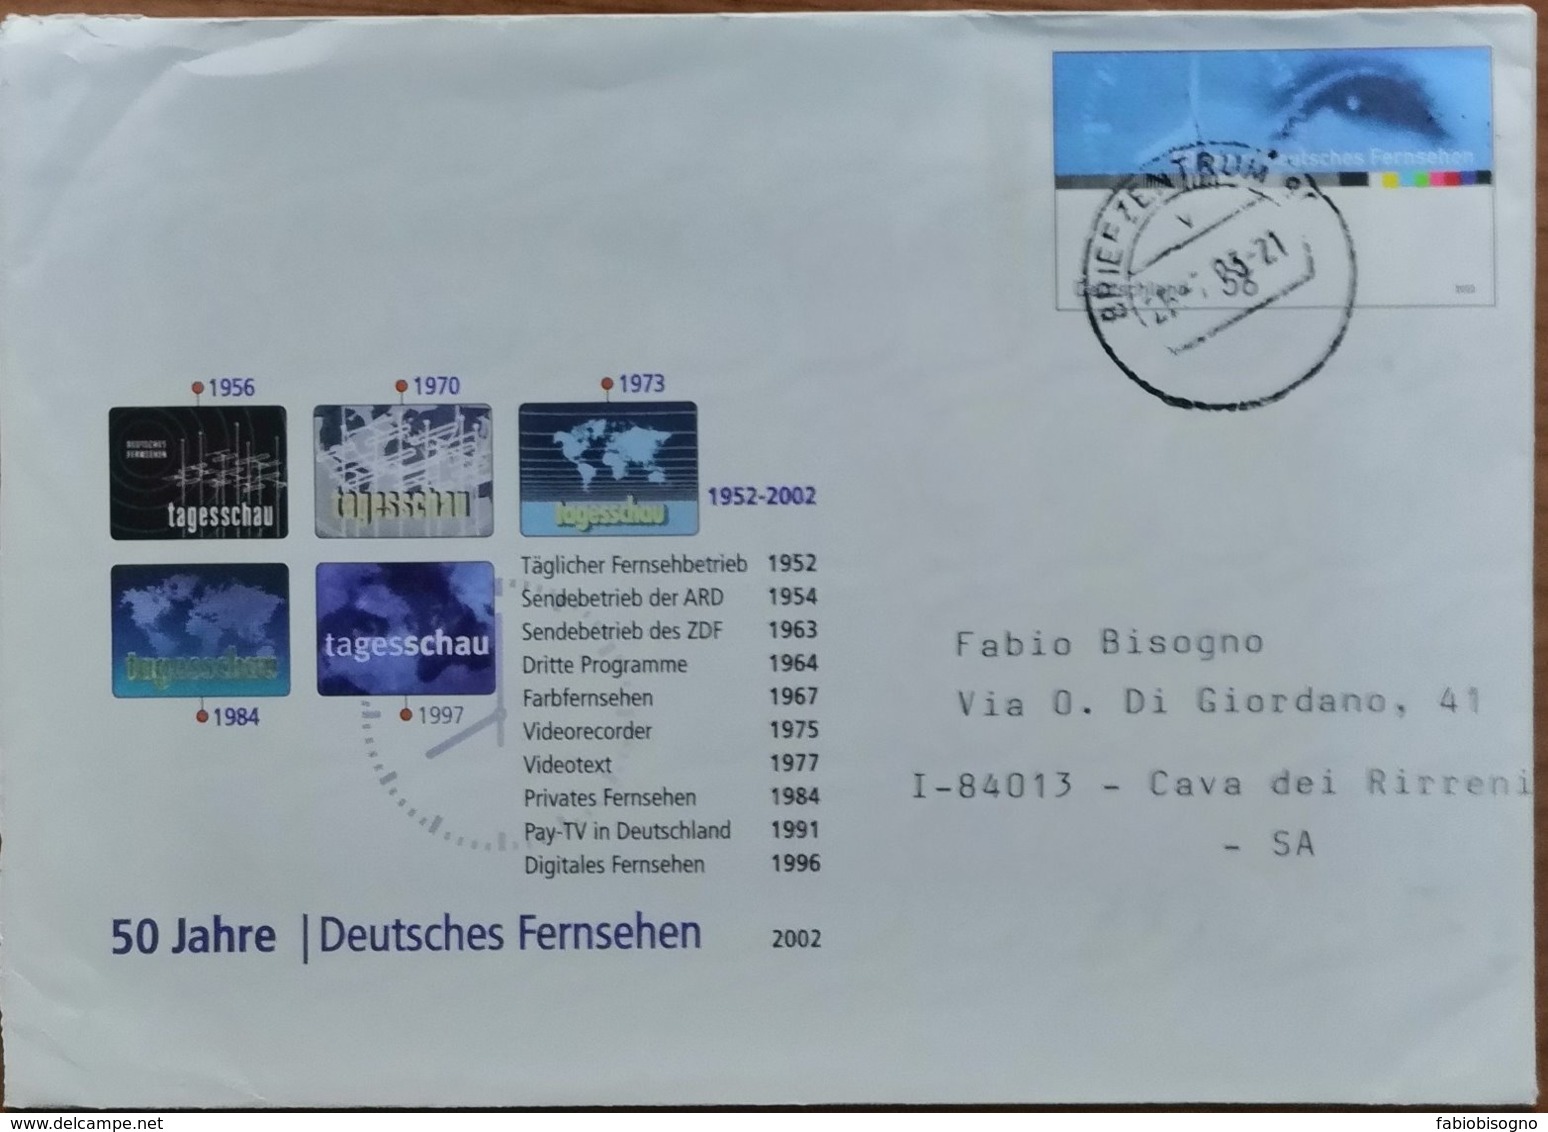 2003 Germany  -  Fernsehen 56 - Used Postal Cover To Italy - Covers - Used